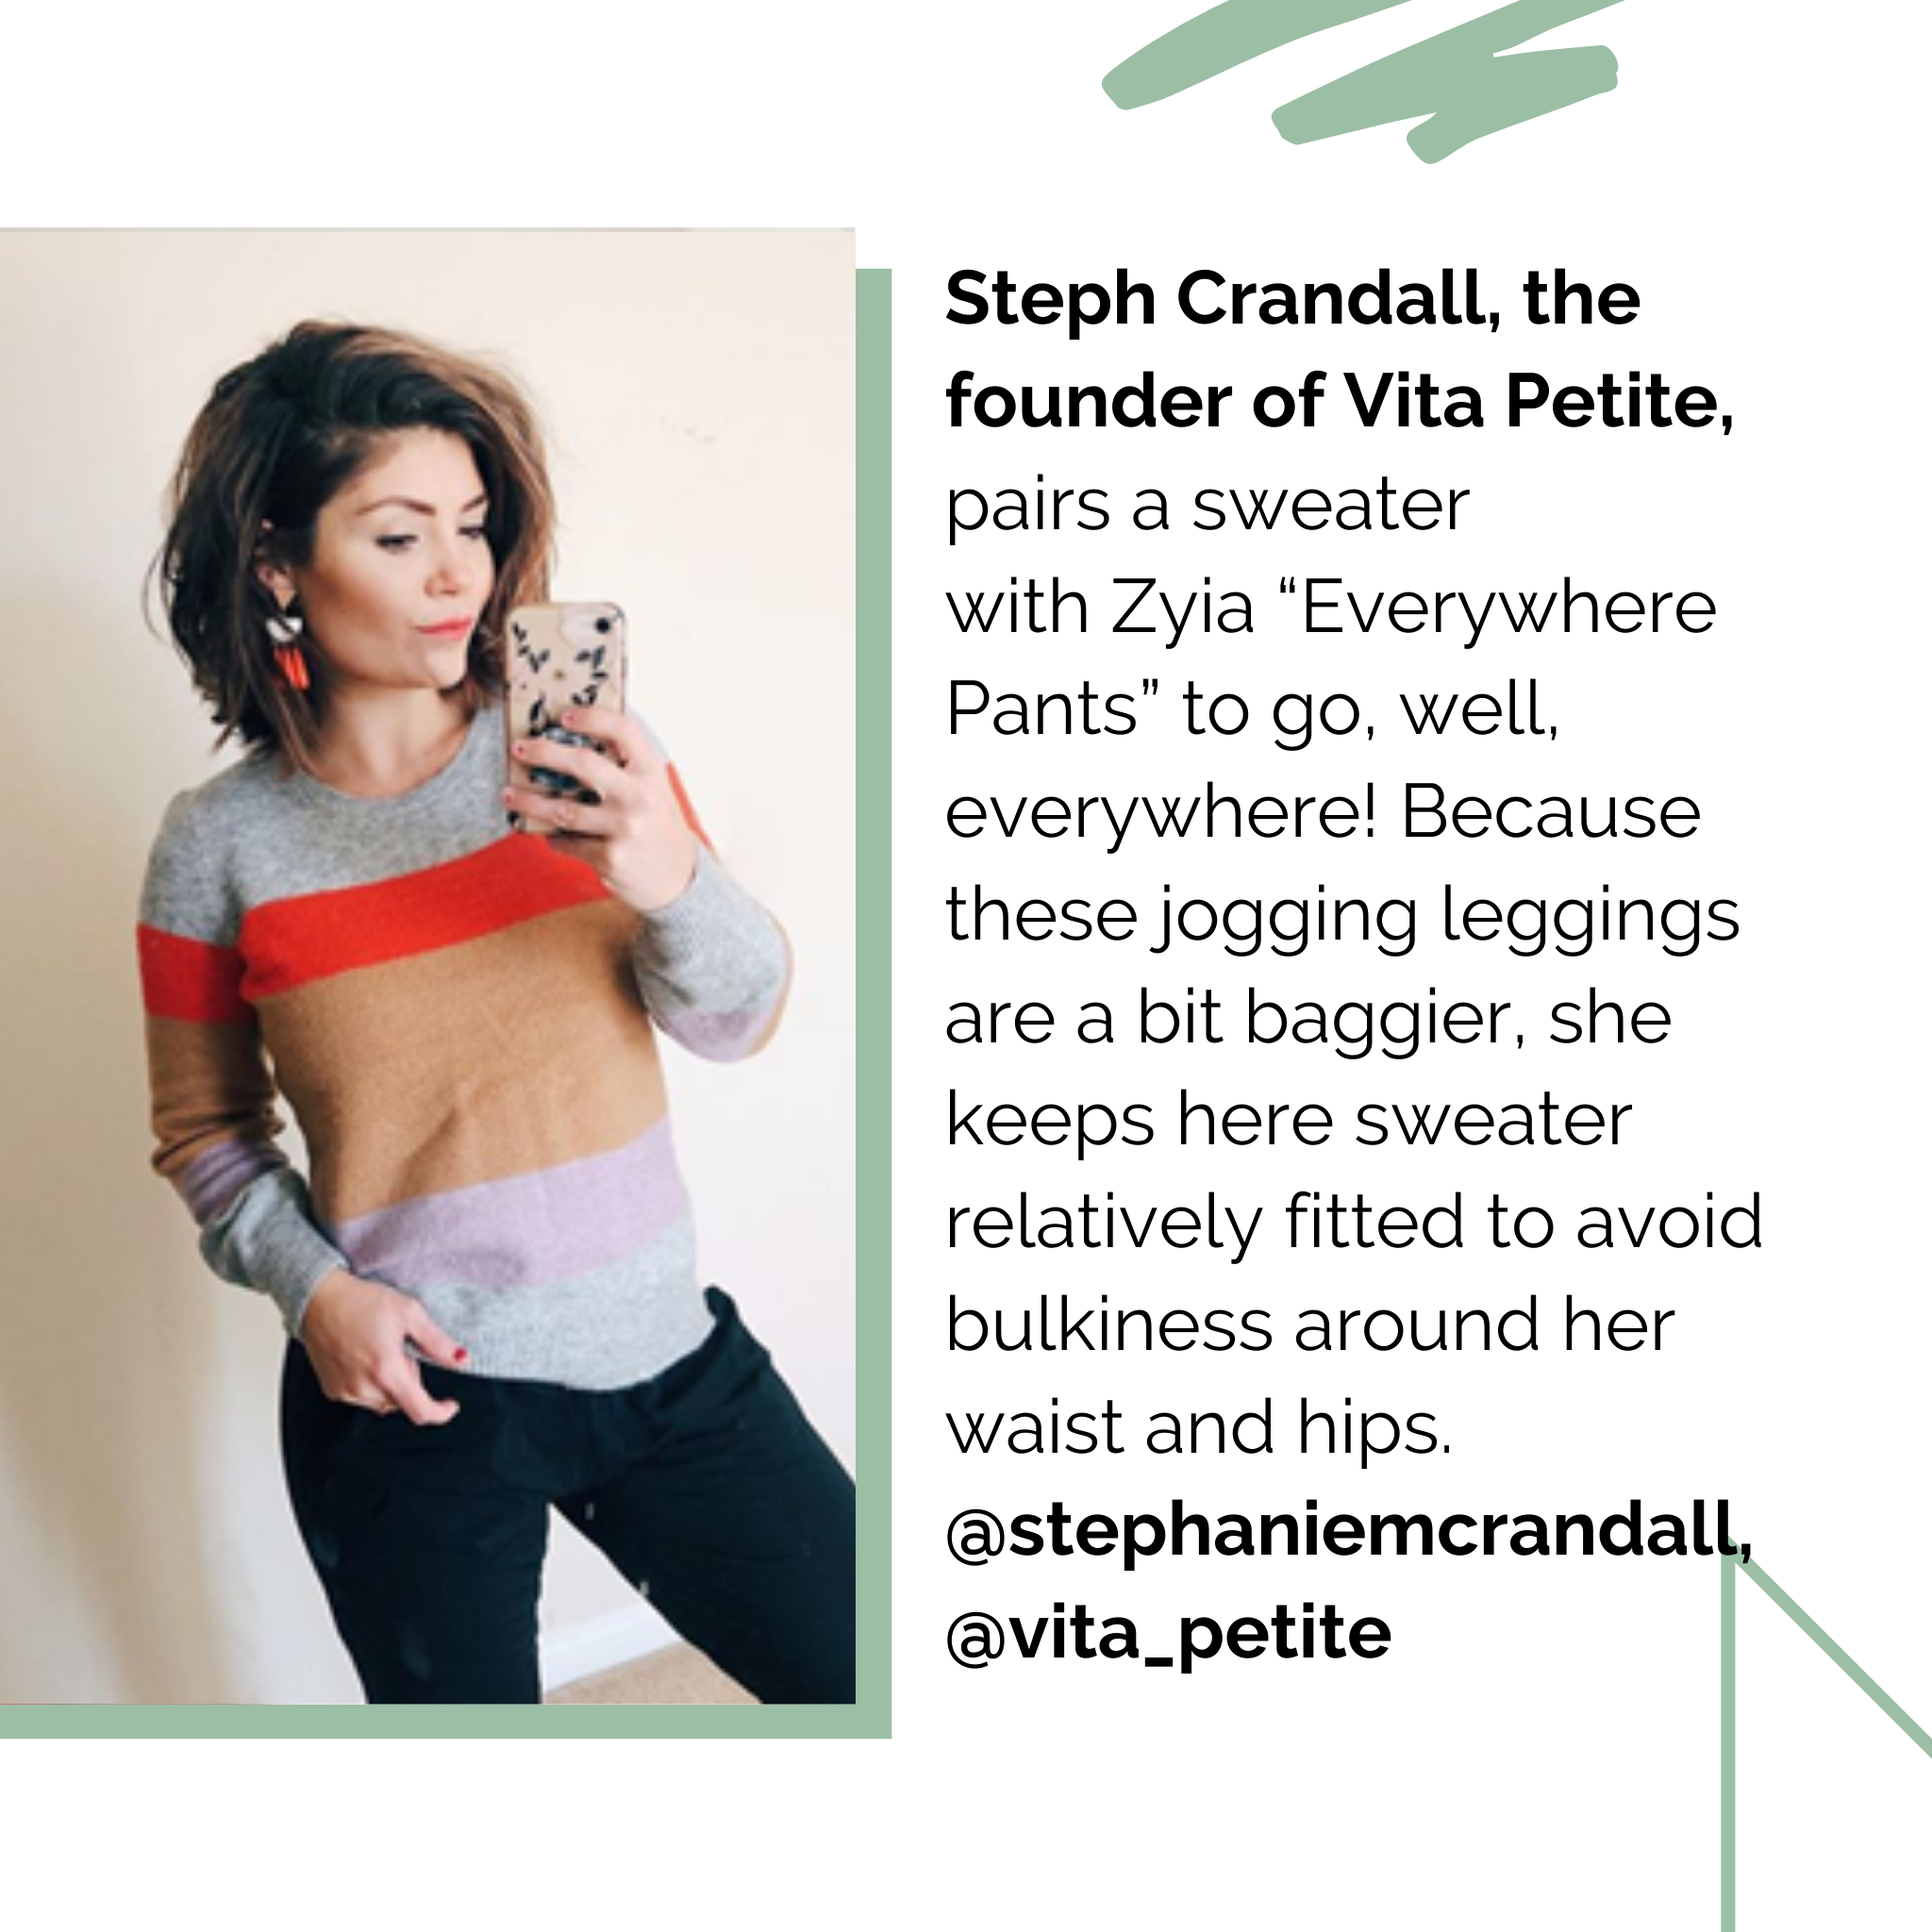 Steph Crandall, the founder of Vita Petite, pairs a sweater with Zyia “Everywhere Pants” to go, well, everywhere! Because these jogging leggings are a bit baggier, she keeps here sweater relatively fitted to avoid bulkiness around her waist and hips